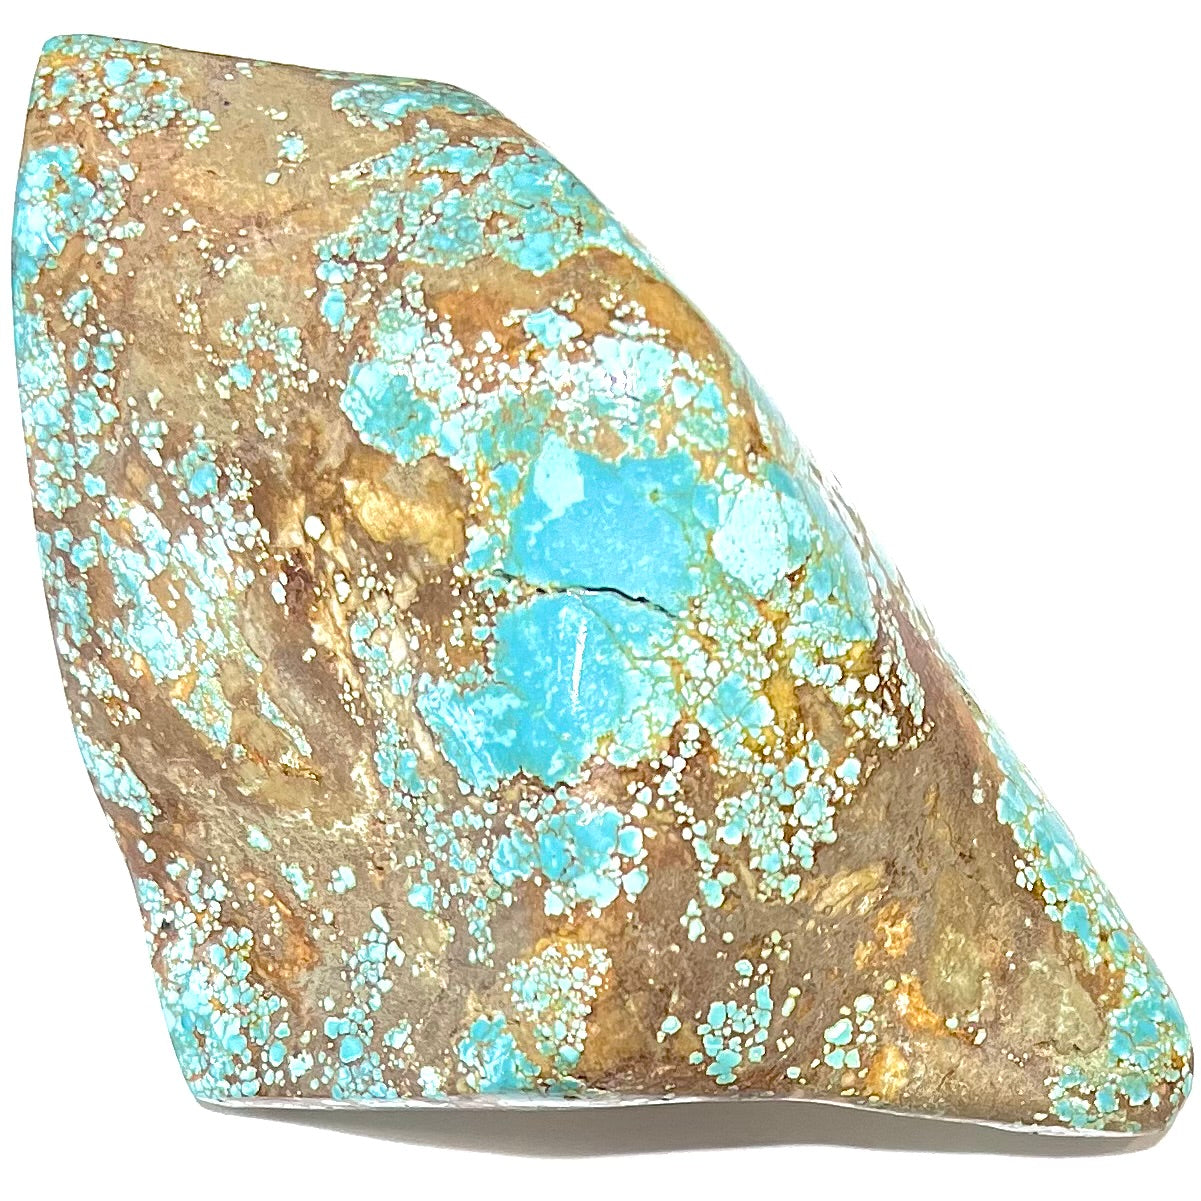 A polished Cripple Creek turquoise stone from Teller County, Colorado.